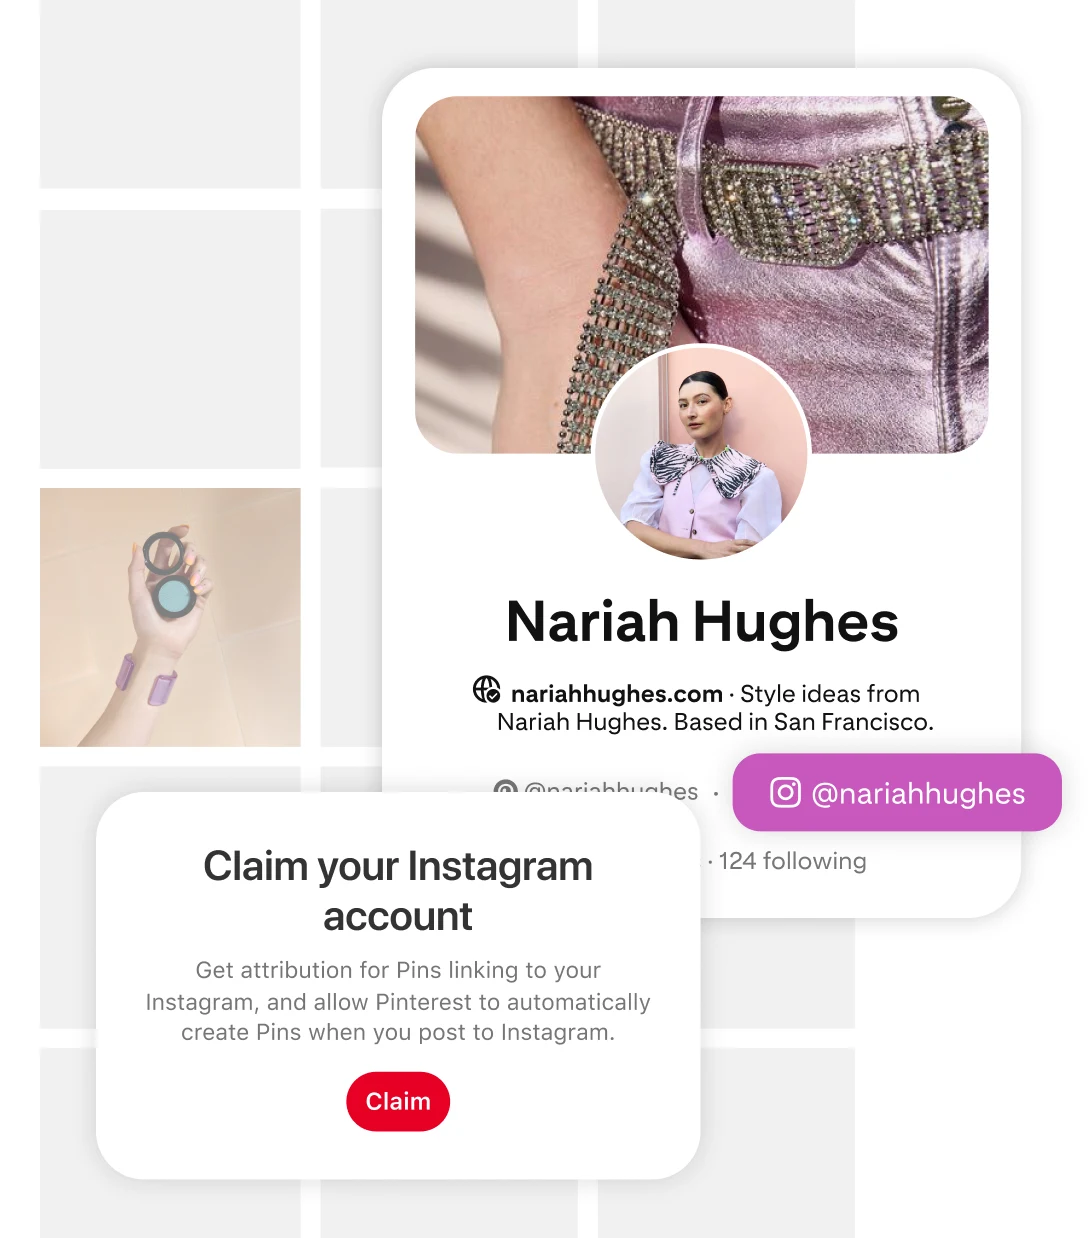 Pinterest Instagram account claiming feature and the Pinterest profile for user Nariah Hughes